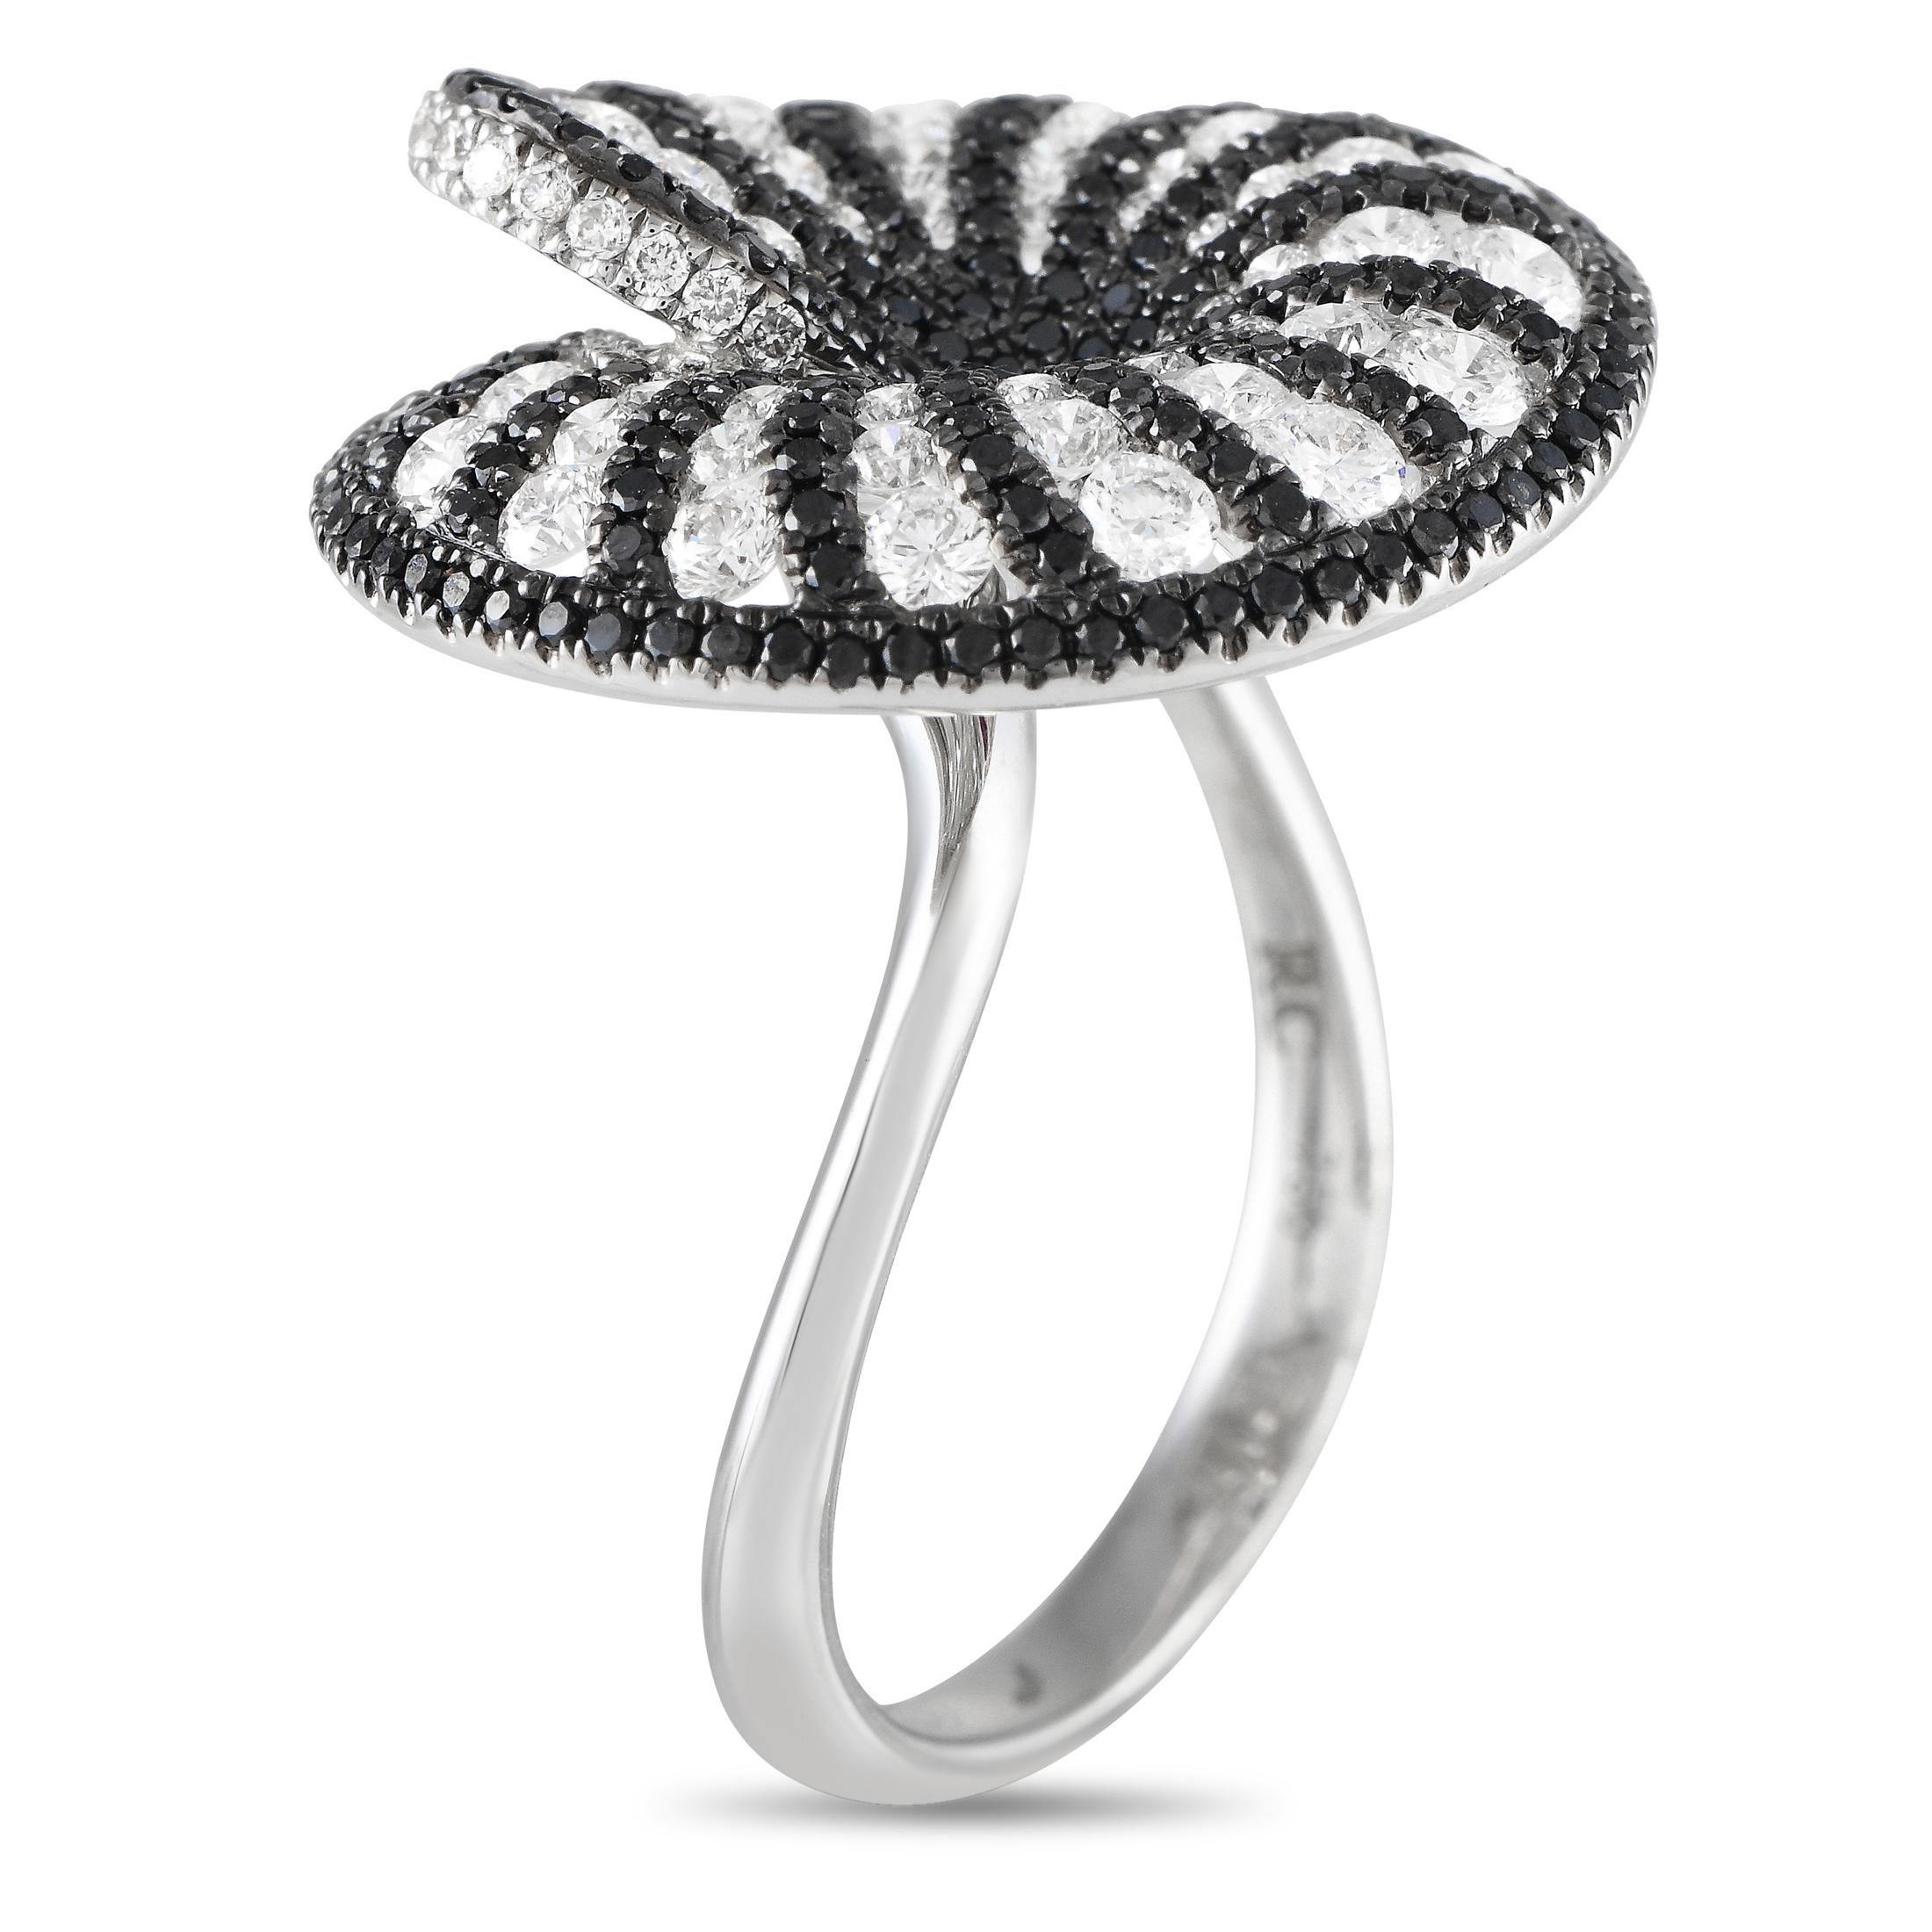 This delicate Roberto Coin ring is nothing short of breathtaking. White Diamonds totaling 1.25 carats and Black Diamonds totaling 1.10 carats are beautifully juxtaposed on this rings uniquely elegant 18K White Gold setting. Impeccably crafted and